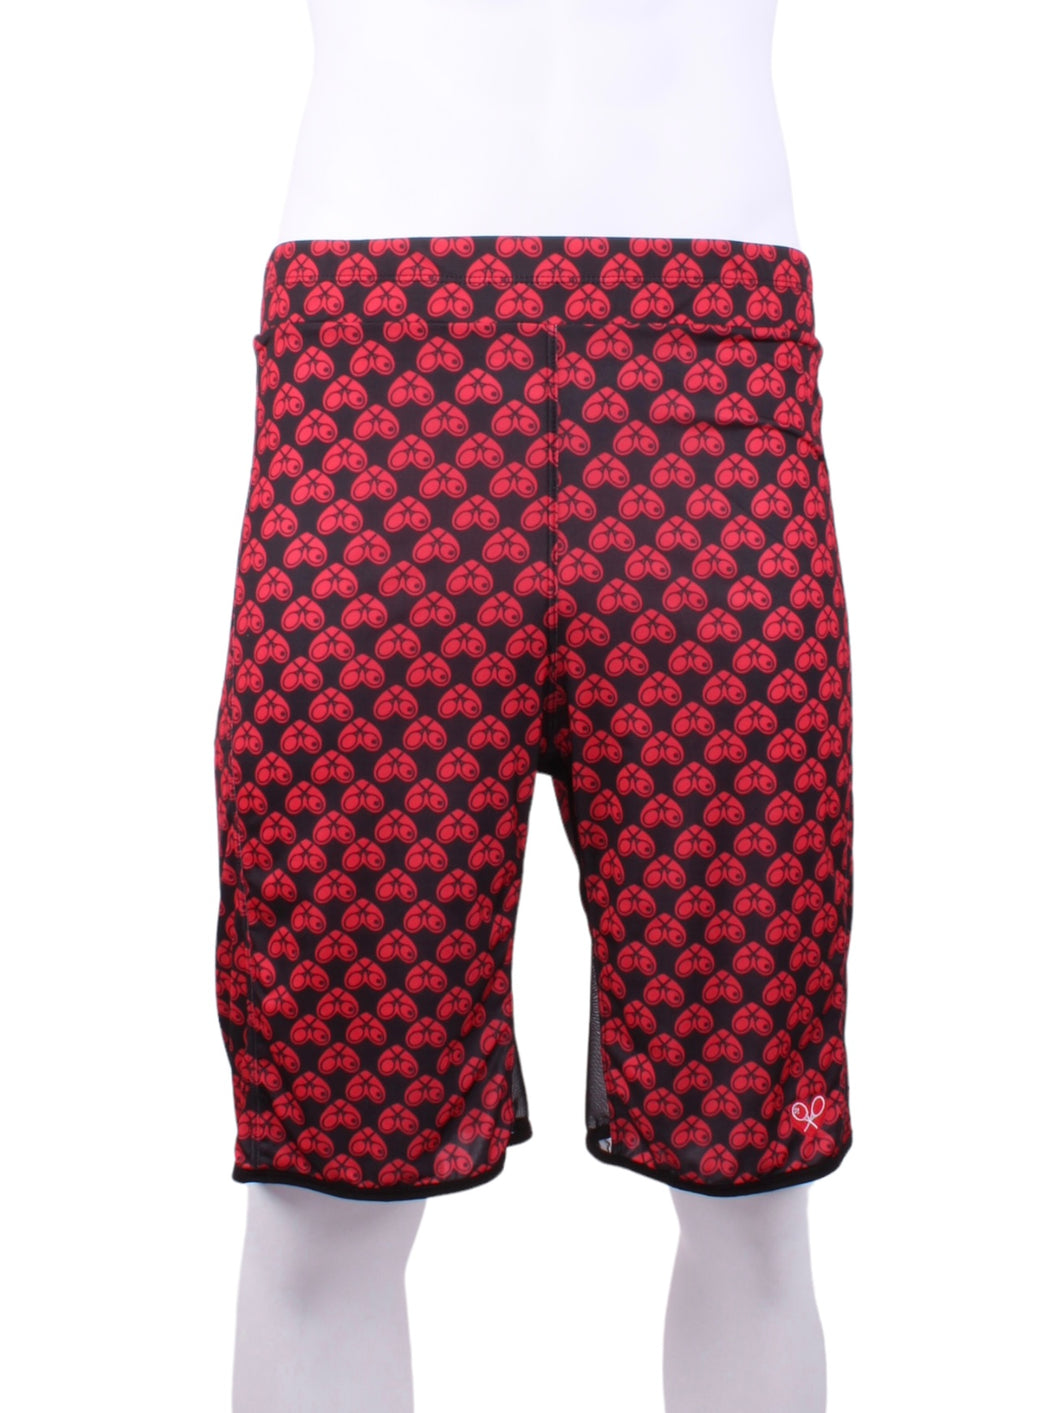 New for 2022 - the Mini Red Heart men's original Shorts with Mesh are available for sale only in our Beverly Hills Boutique - 